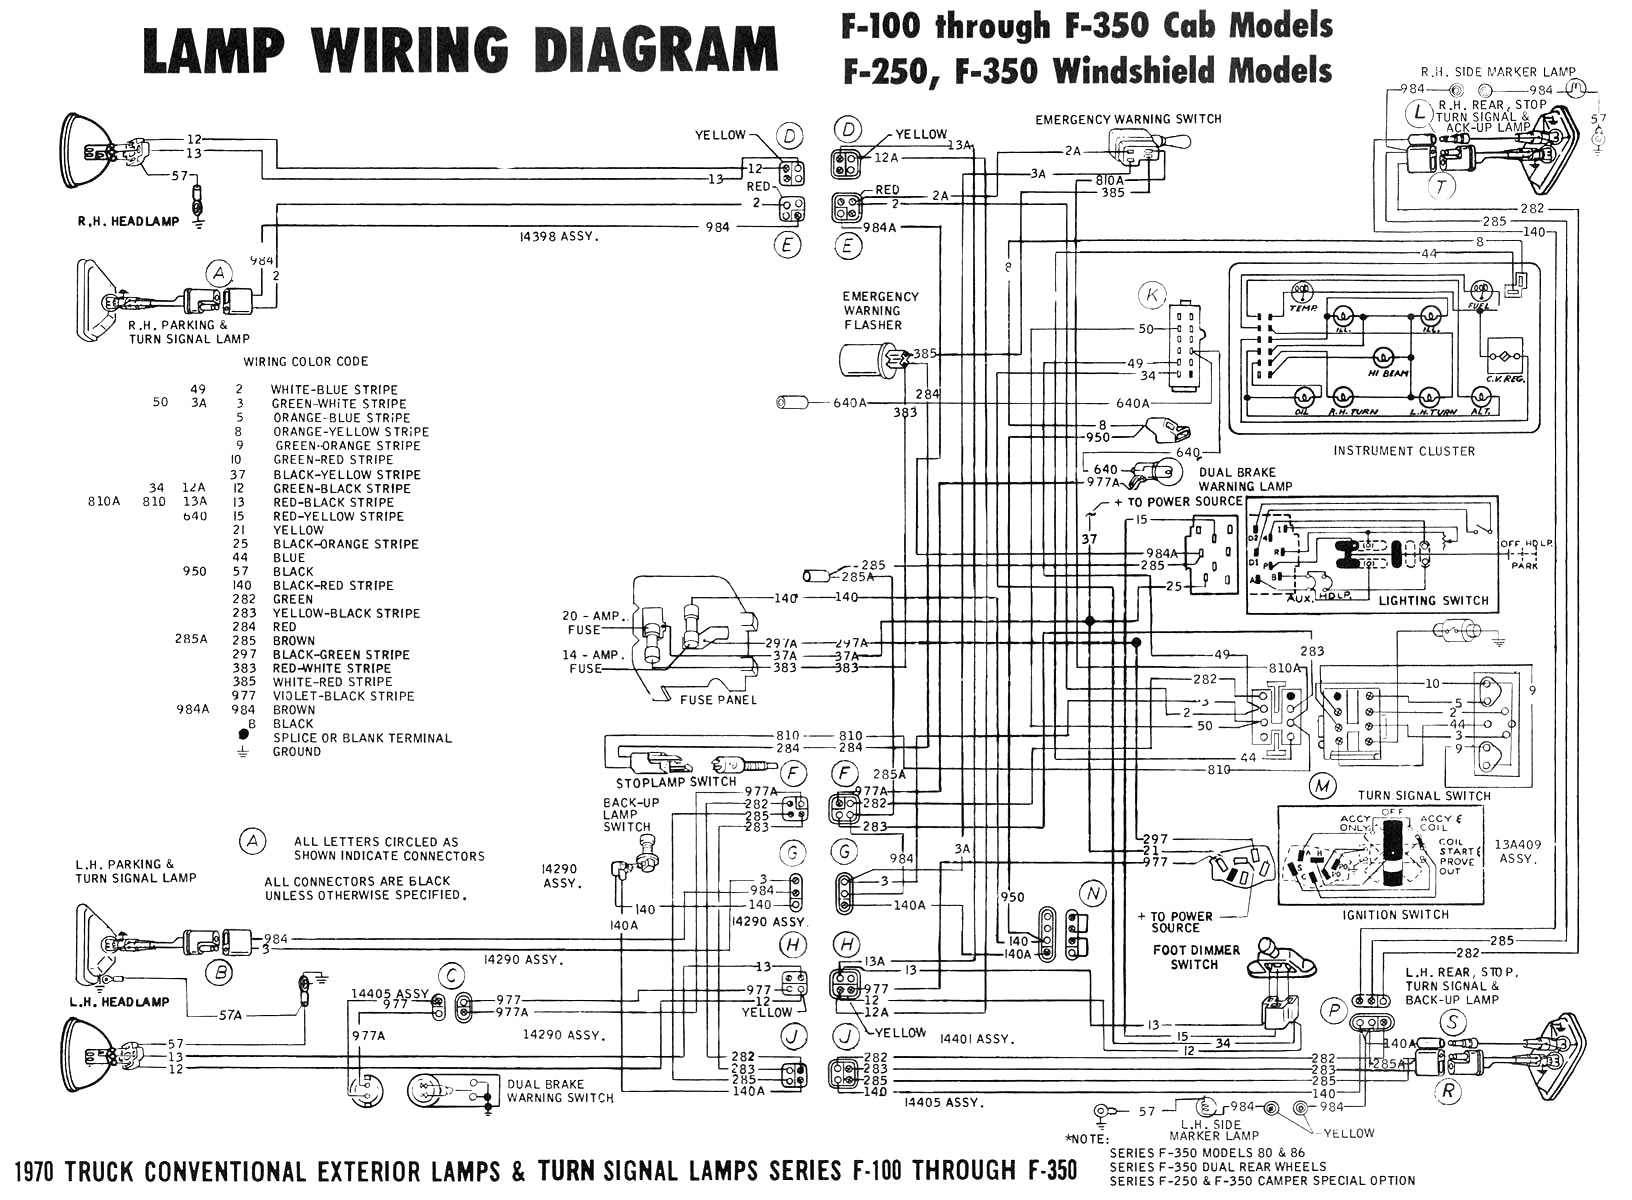 diagrams likewise 2001 dodge ram 1500 on wire diagram 99 chevy wiring diagram also 2001 chevy silverado fuel pump likewise 1998 dodge